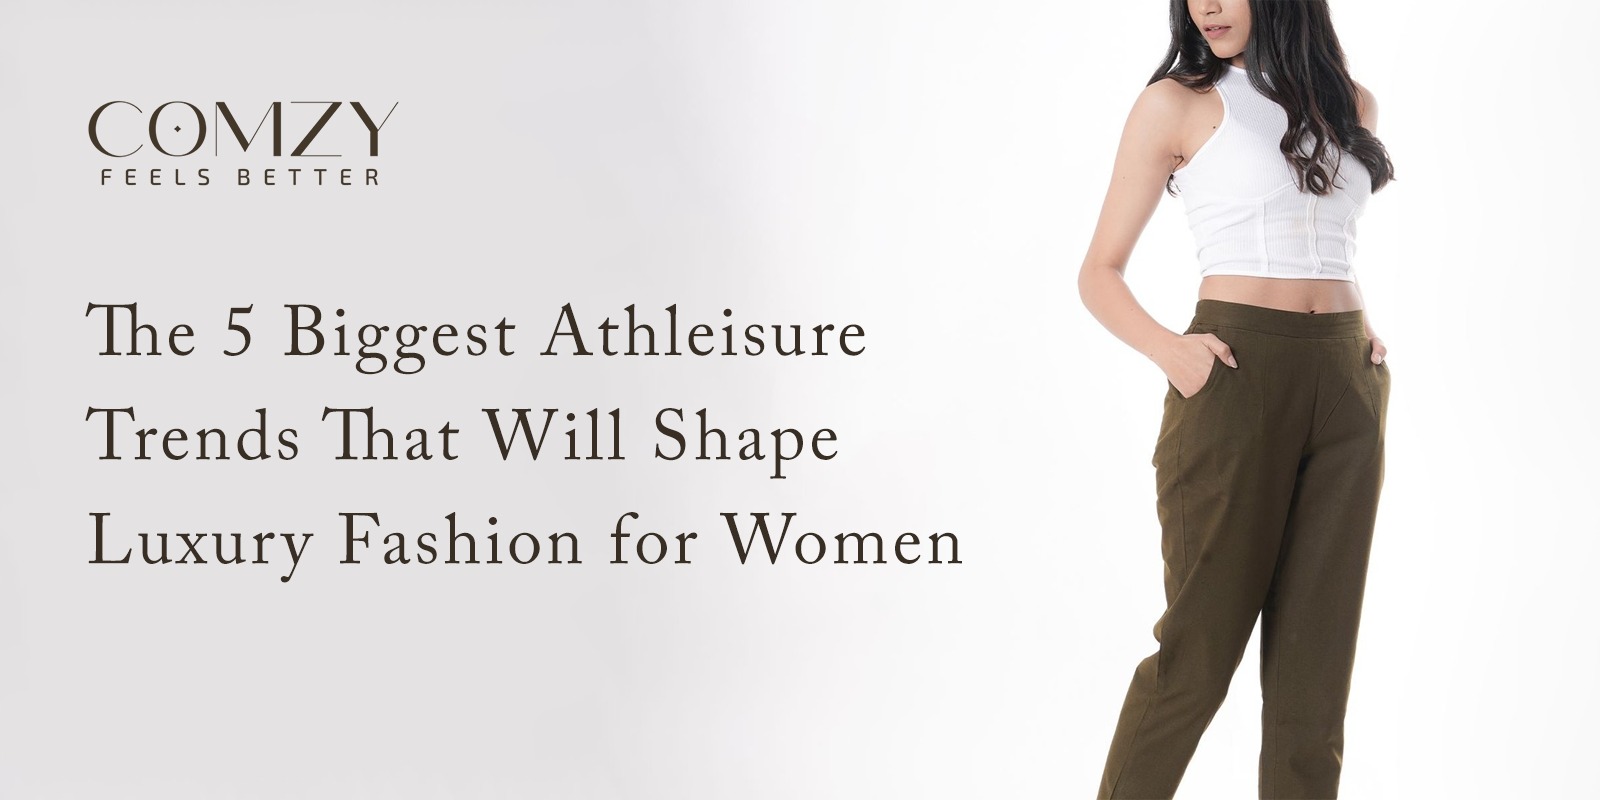 The 5 Biggest Athleisure Trends That Will Shape Luxury Fashion for Women-Stumbit Fashion